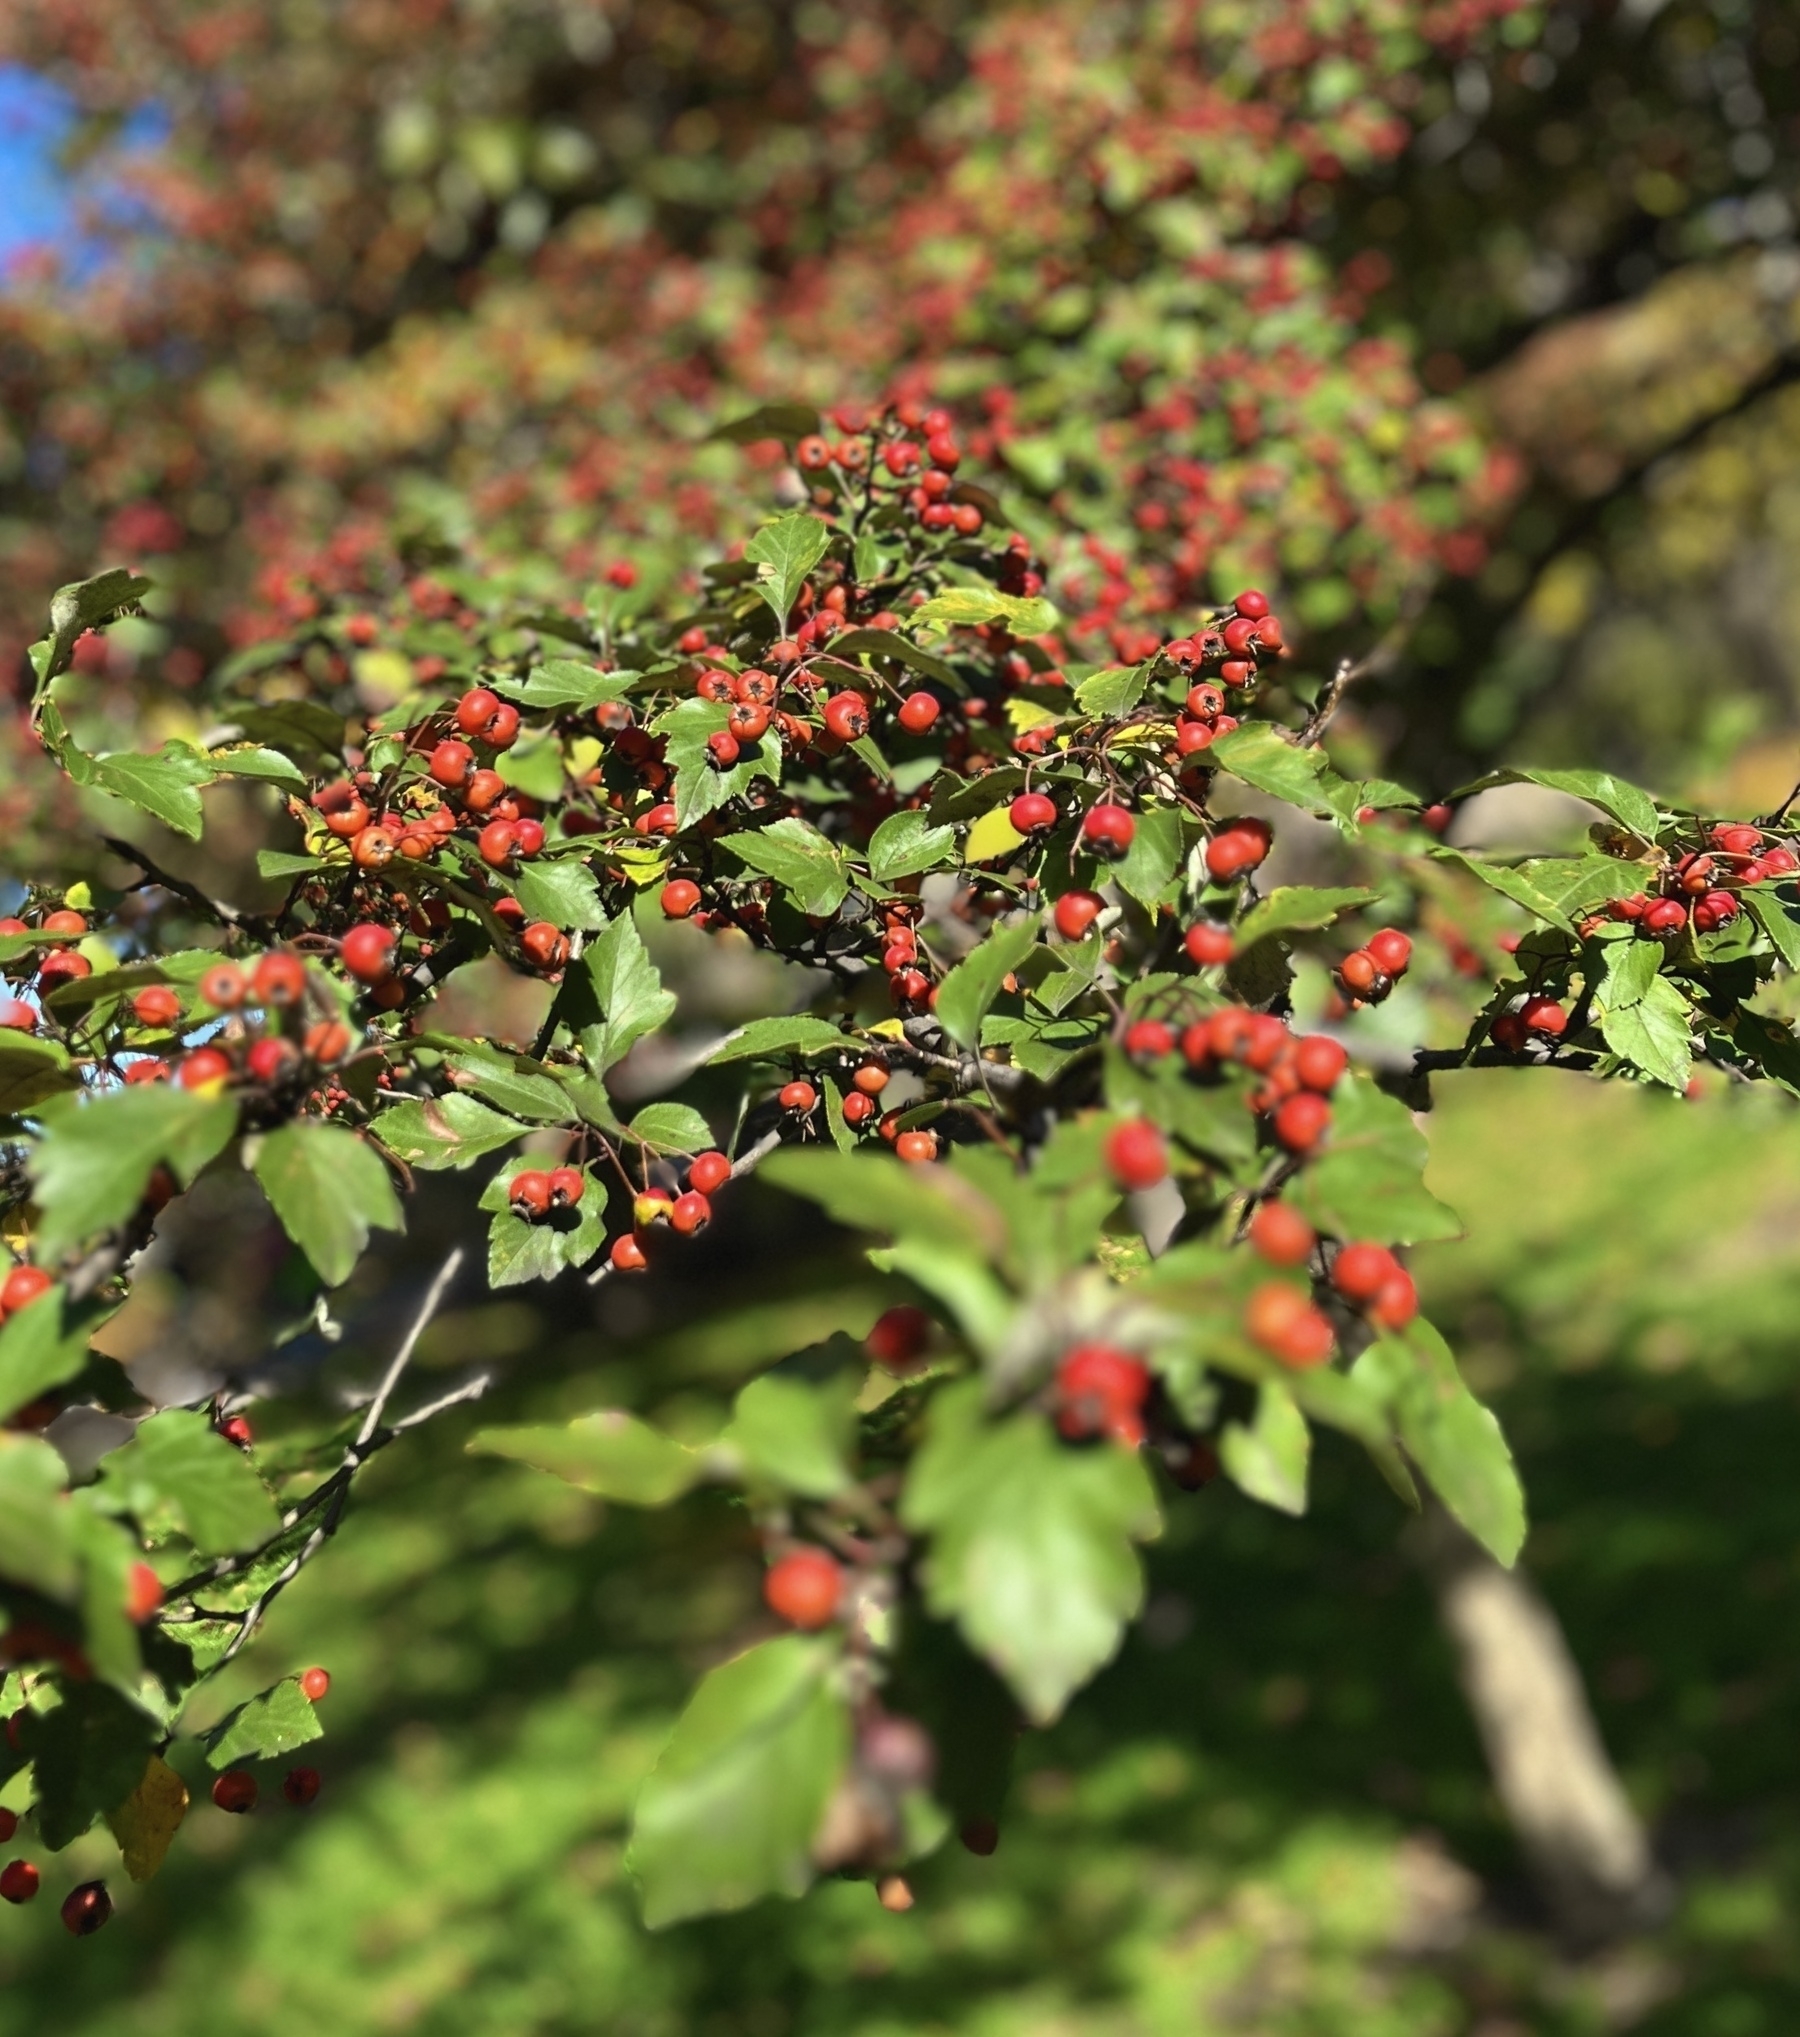 A branch of a tree filled with bright red little round fruits the size of peas. 